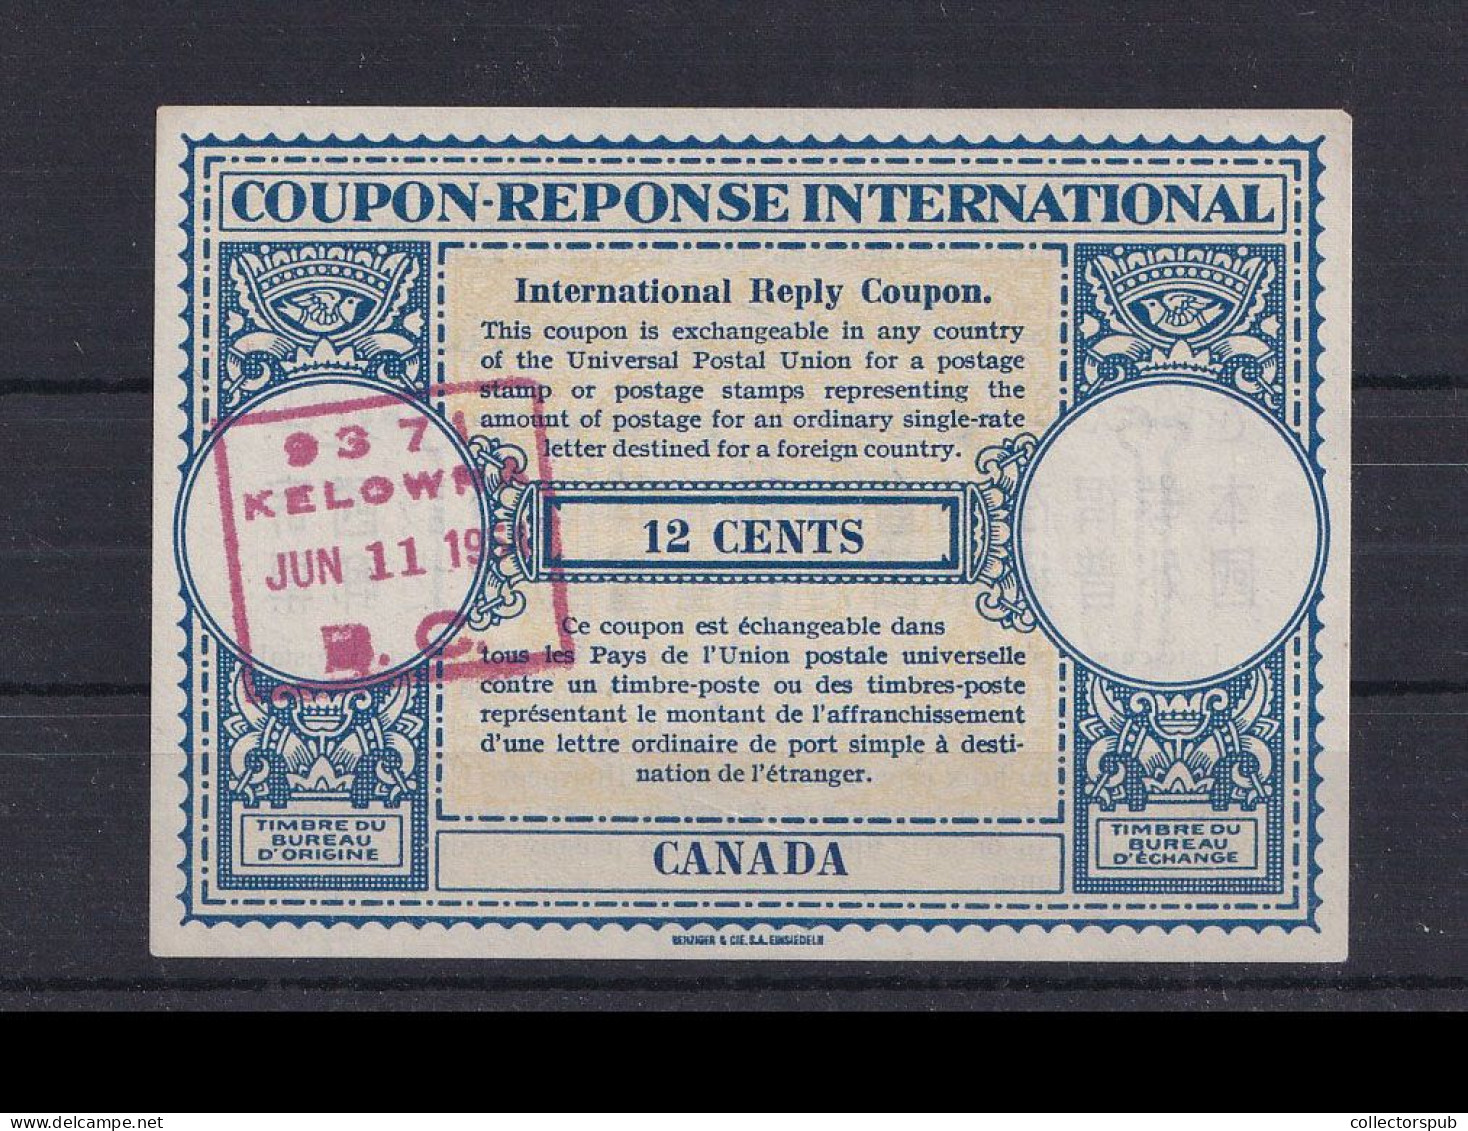 CANADA International Reply Coupon / Coupon Réponse International 1951 - Covers & Documents